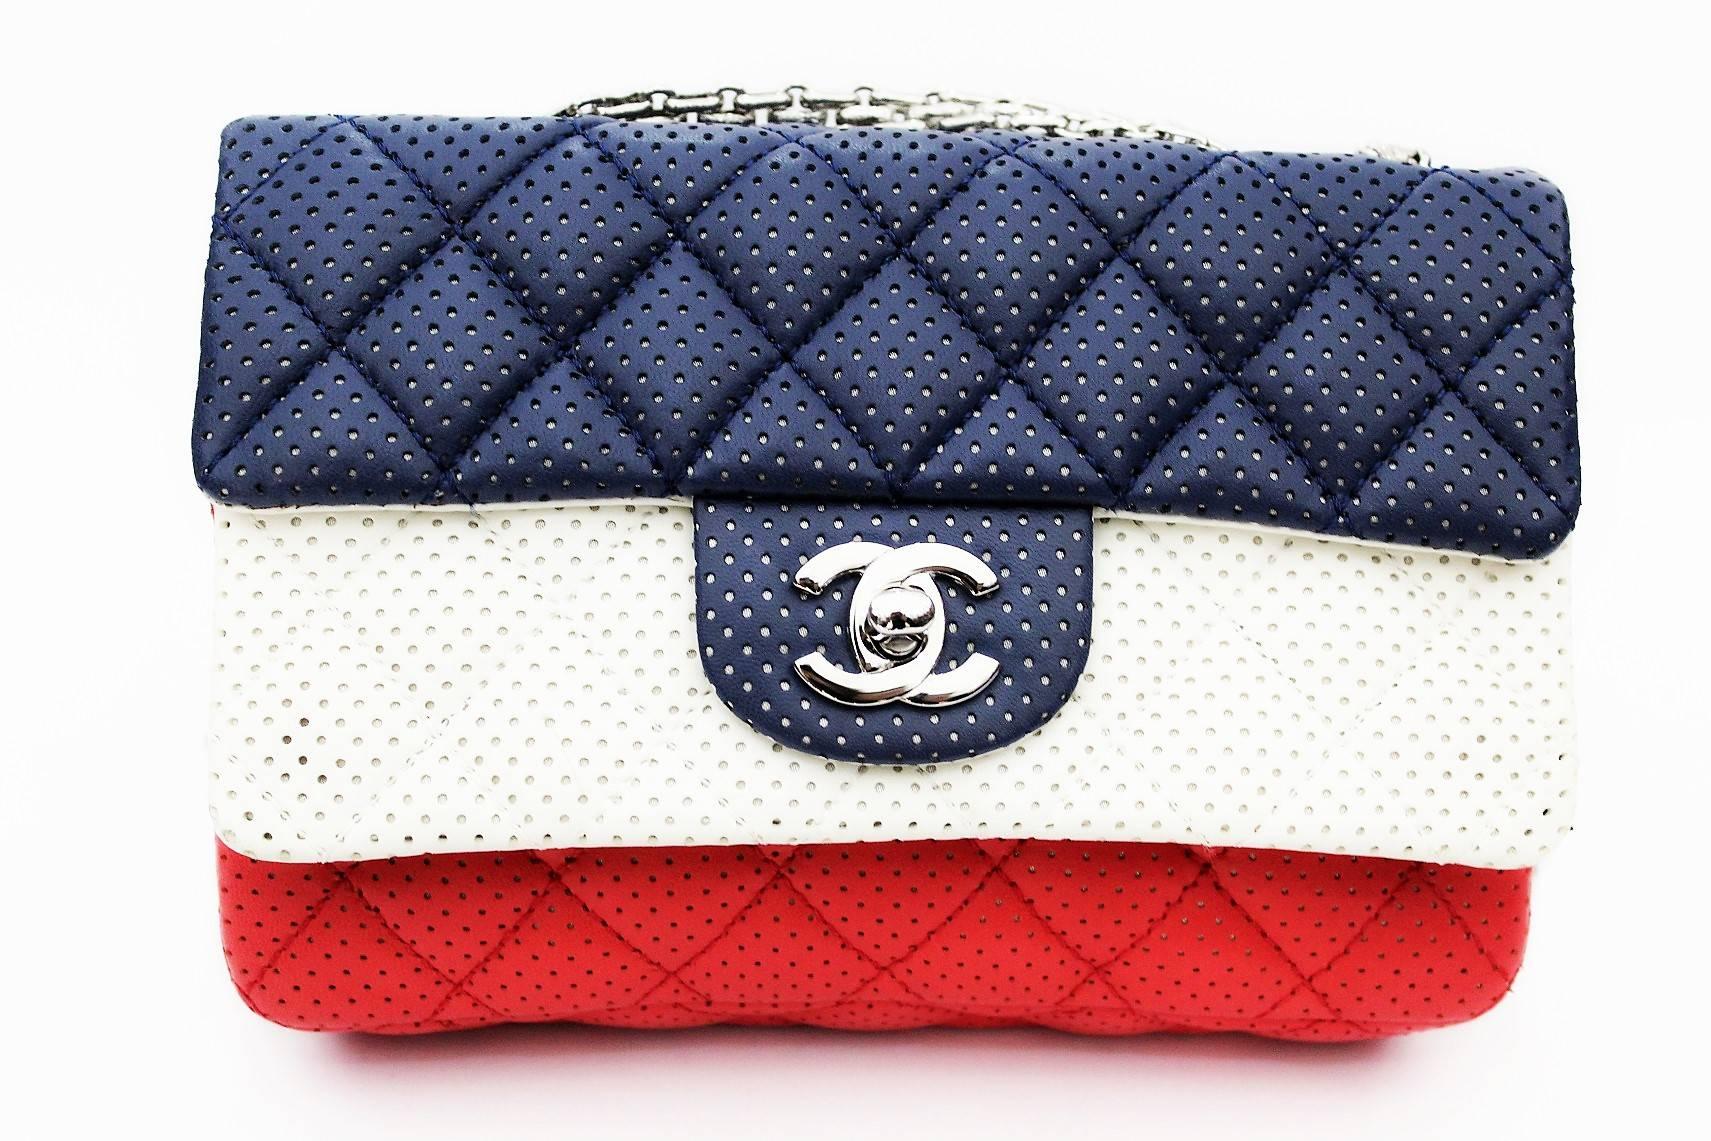 This is an authentic CHANEL Double Flap Perforated Leather Bag in a stunning white red and blue color. This beautiful piece of luxury is made from a quilted perforated leather exterior with matching silver-toned hardware. The Chanel Double Flap bag